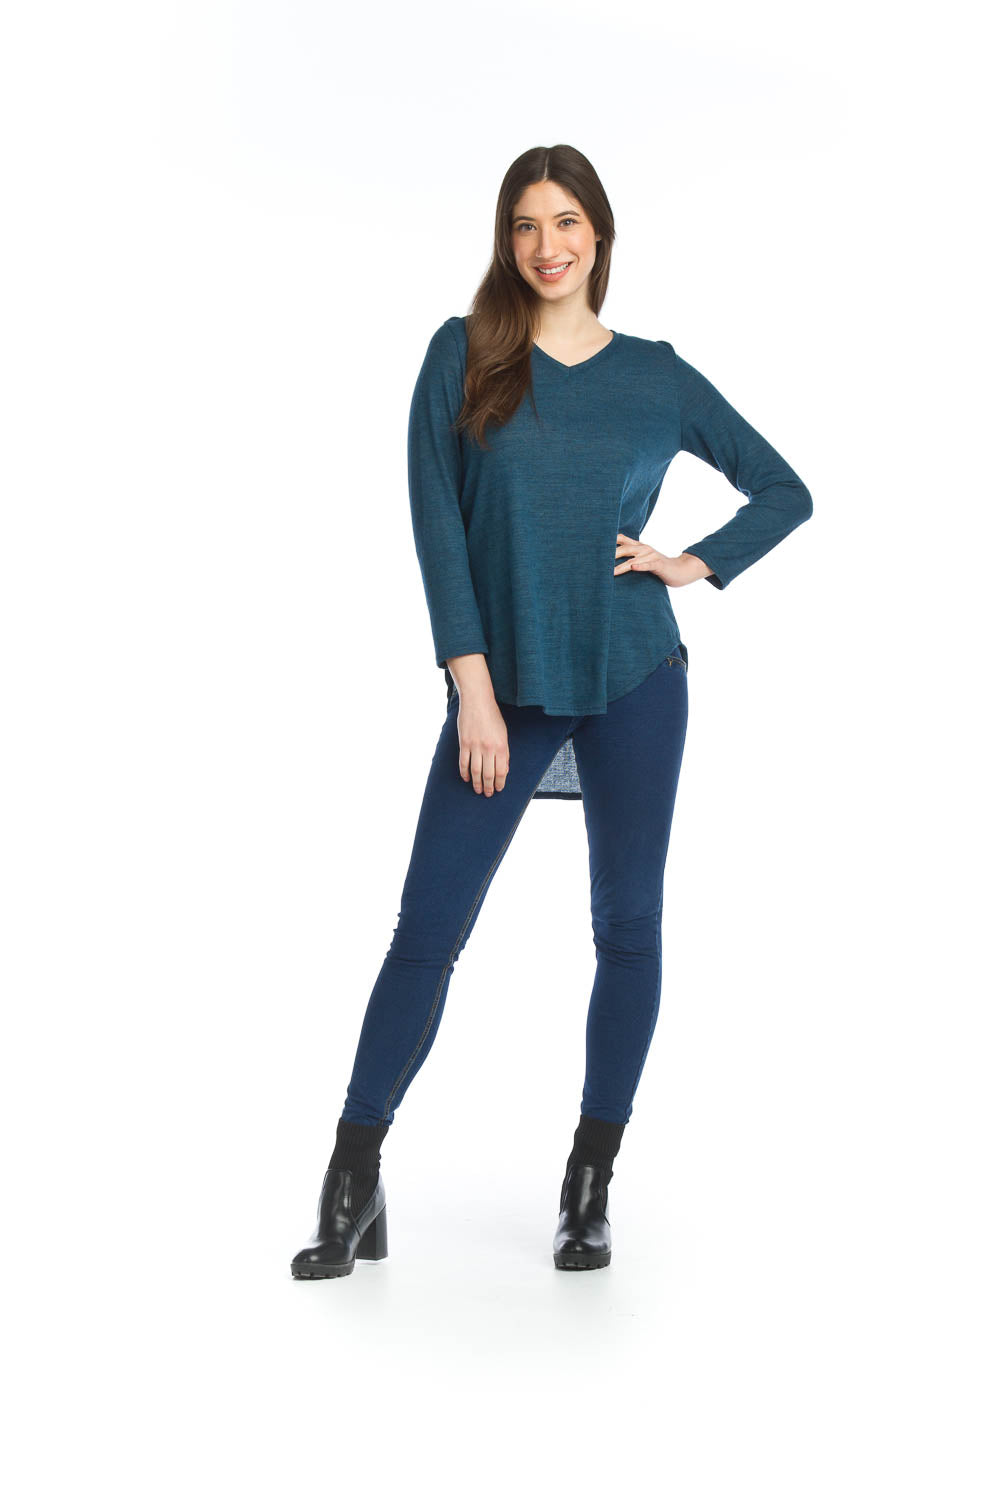 ST-04371 - High Low V Neck Tunic